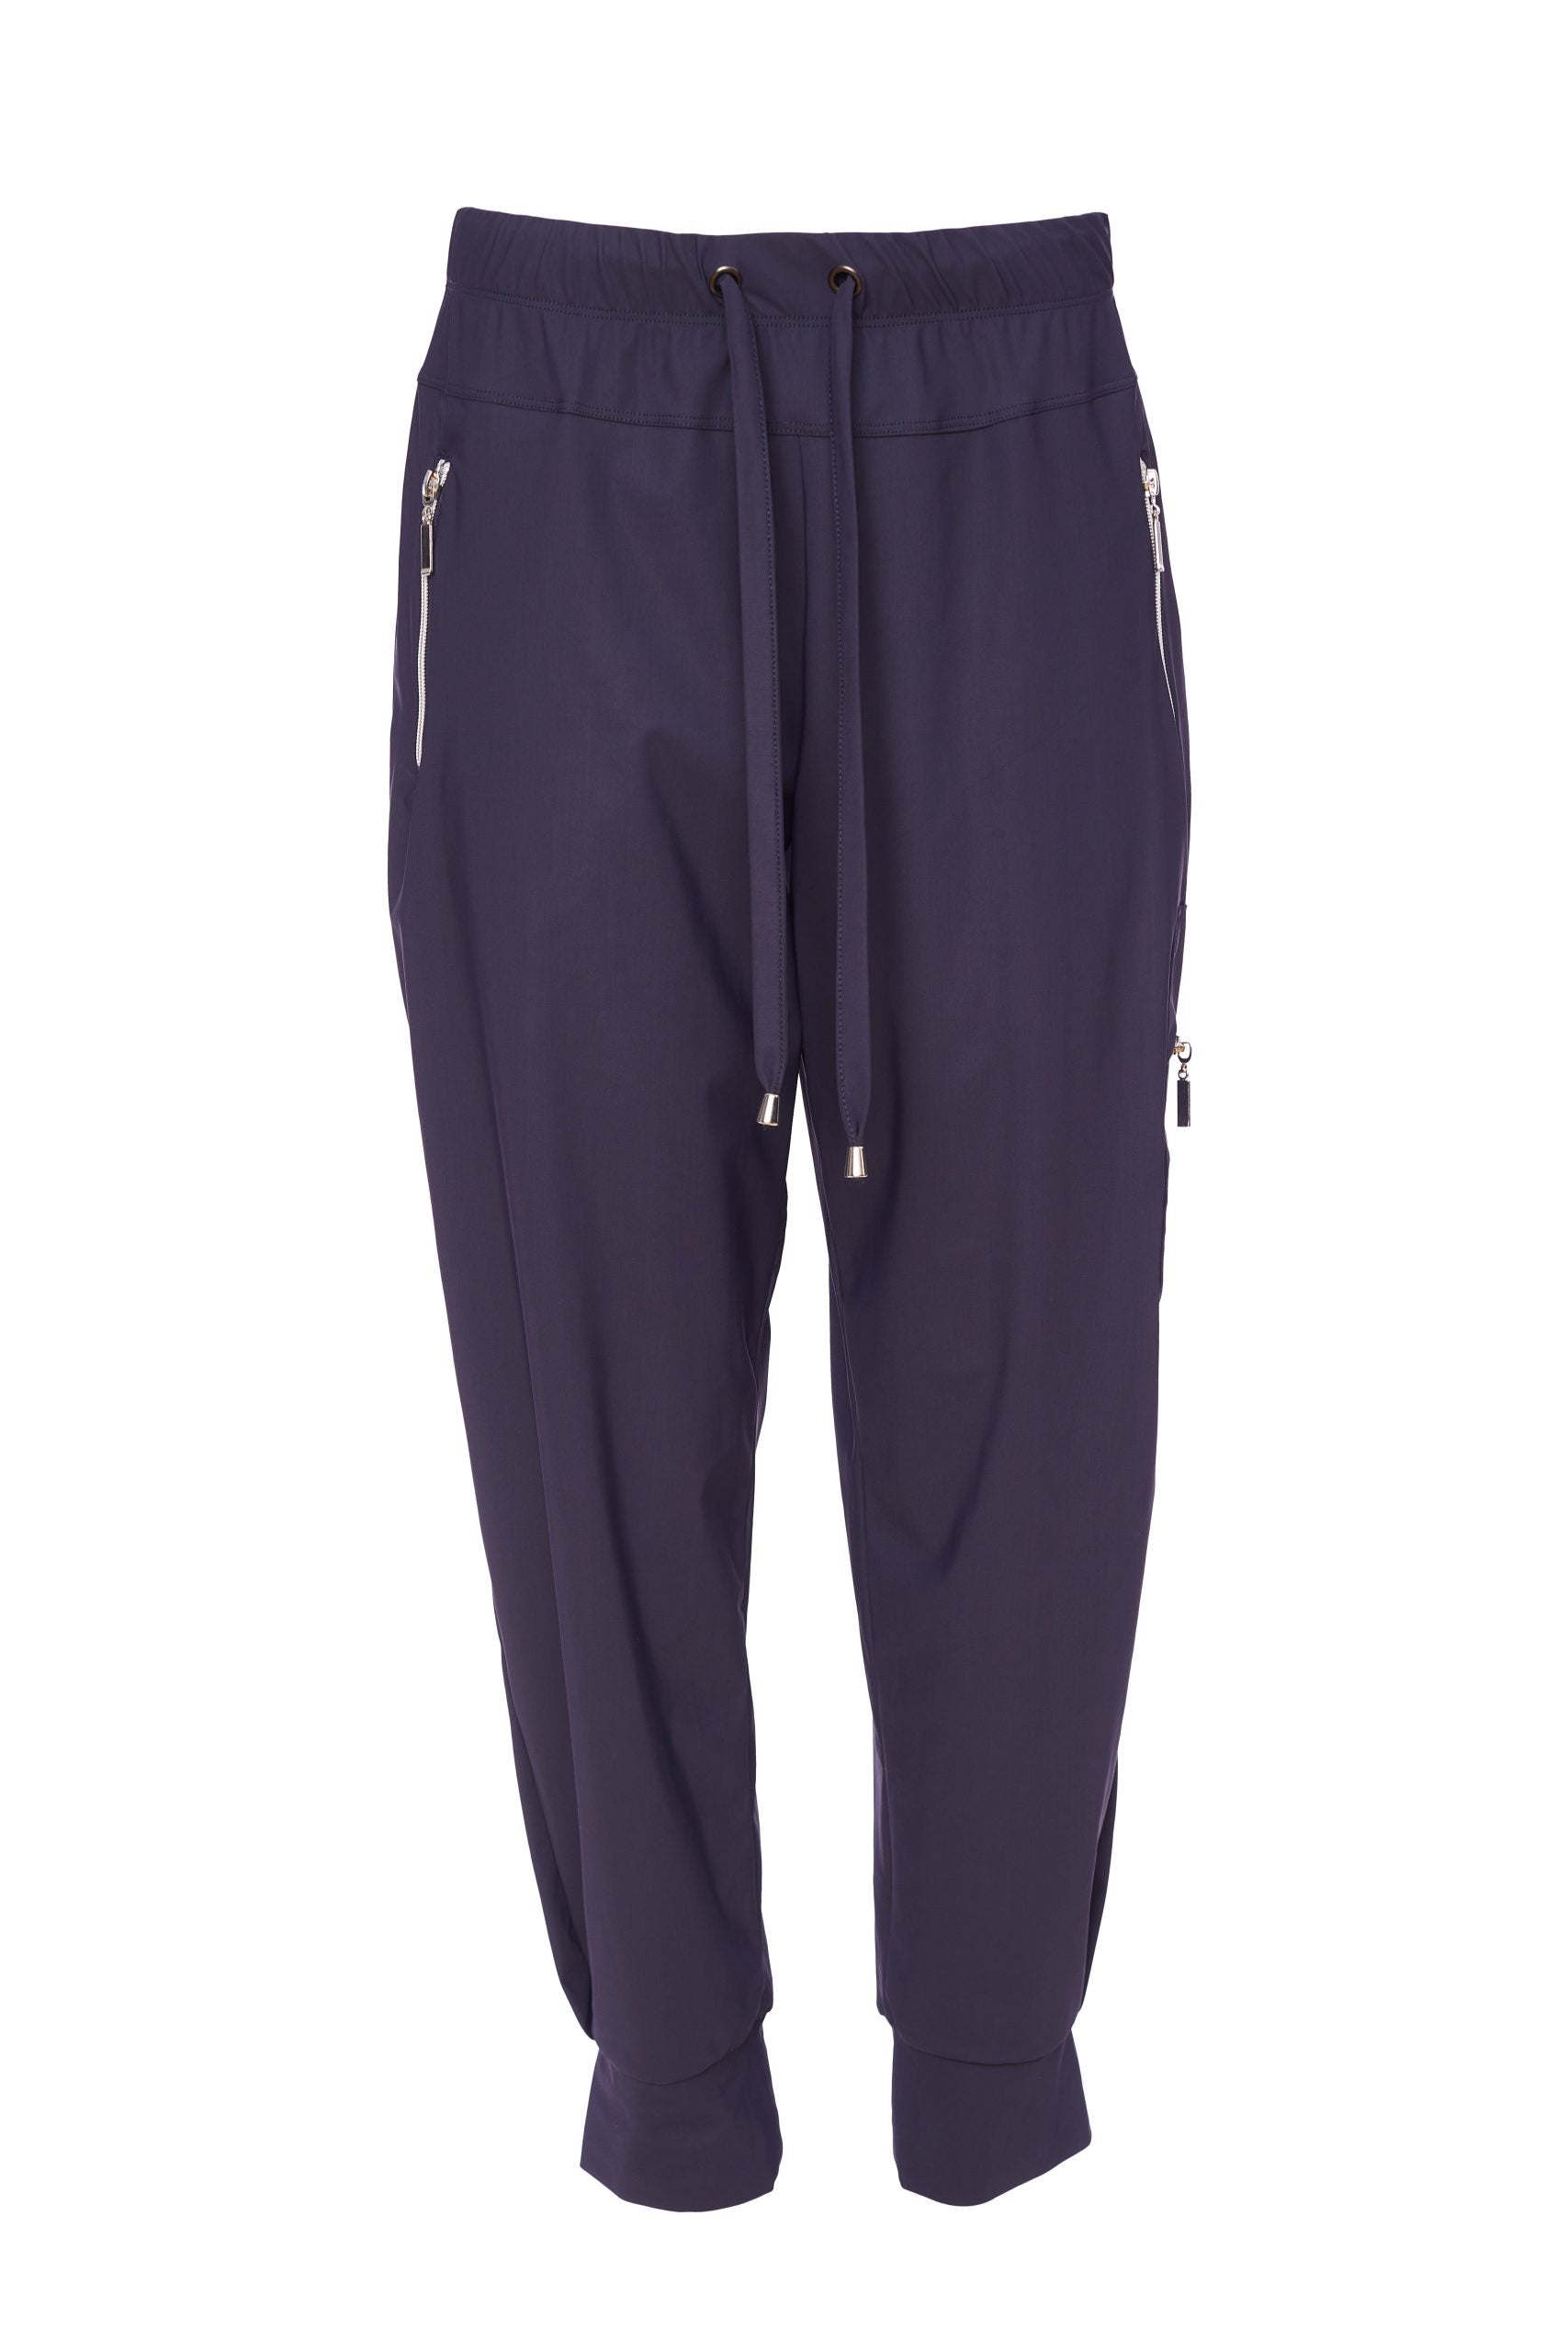 Cuff Trouser with Side Pocket/Zip in Navy